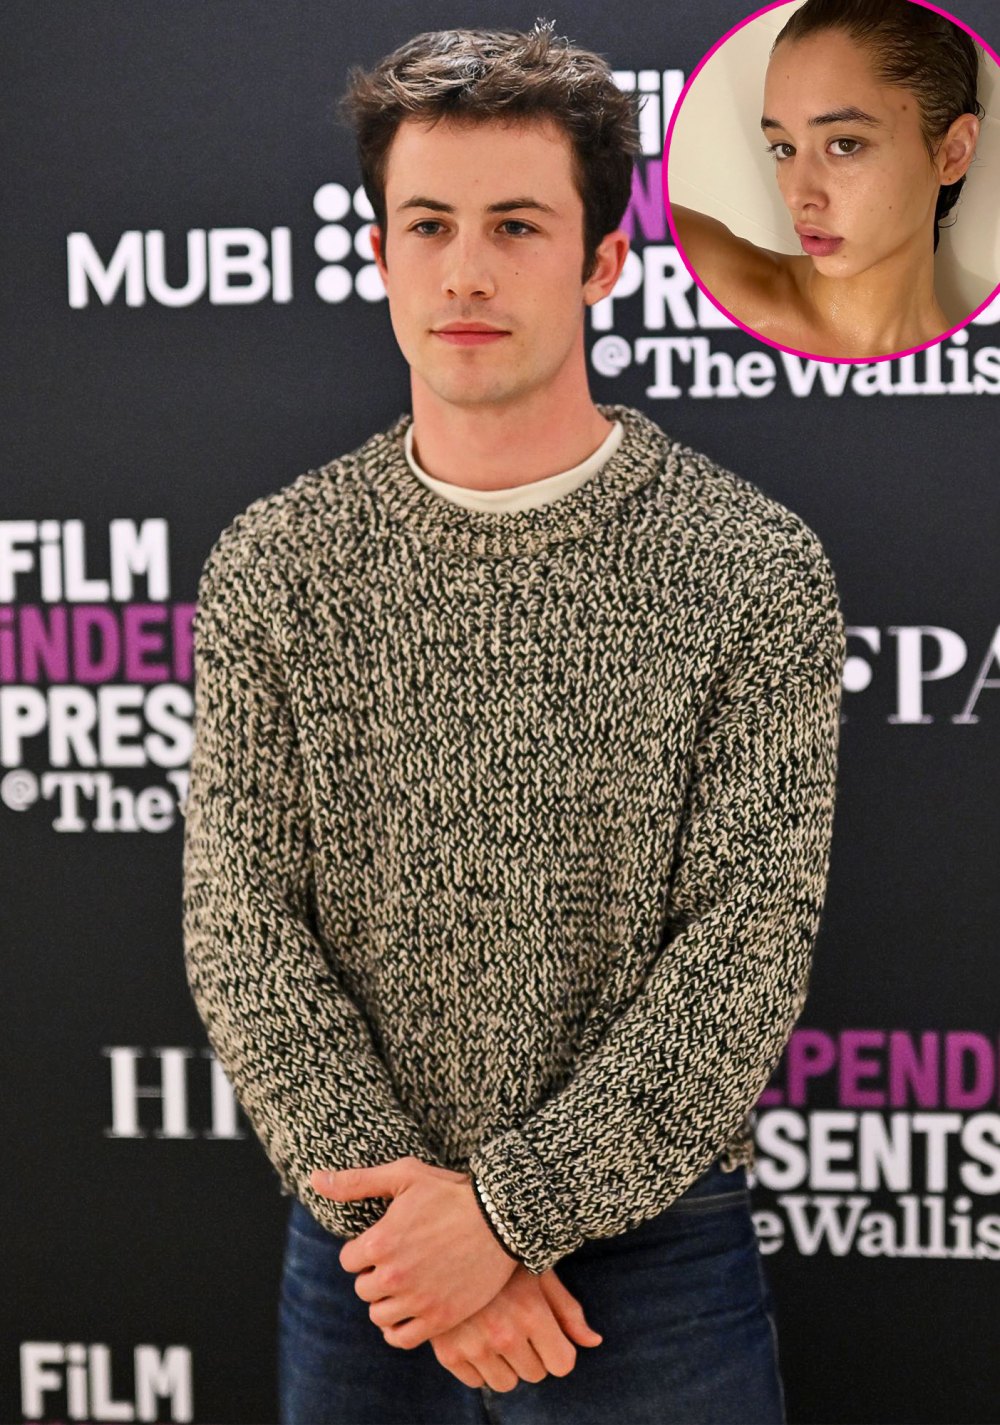 Dylan Minnette Sparks Romance Rumors With Model Isabella Elai at Coachella After Lydia Night Split- Details 001